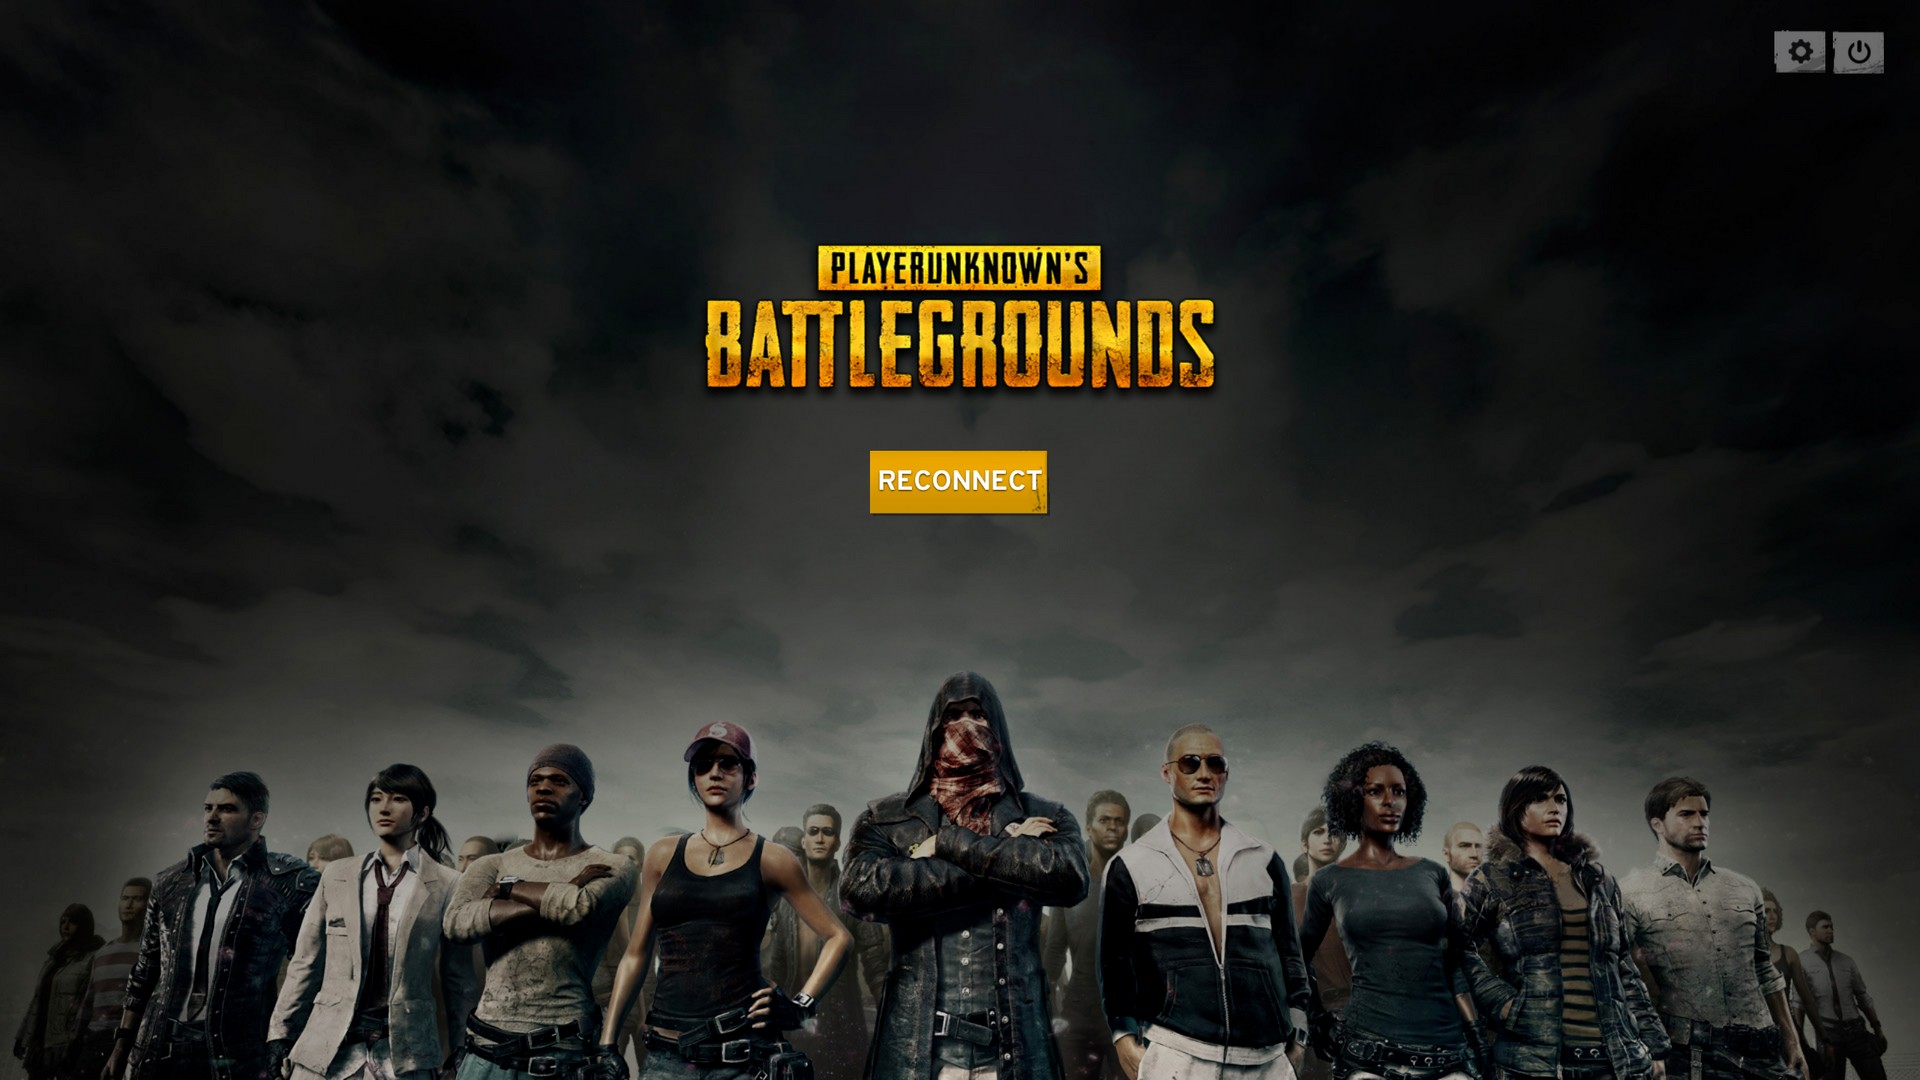 PUBG New Update Wallpaper with image resolution 1920x1080 pixel. You can use this wallpaper as background for your desktop Computer Screensavers, Android or iPhone smartphones